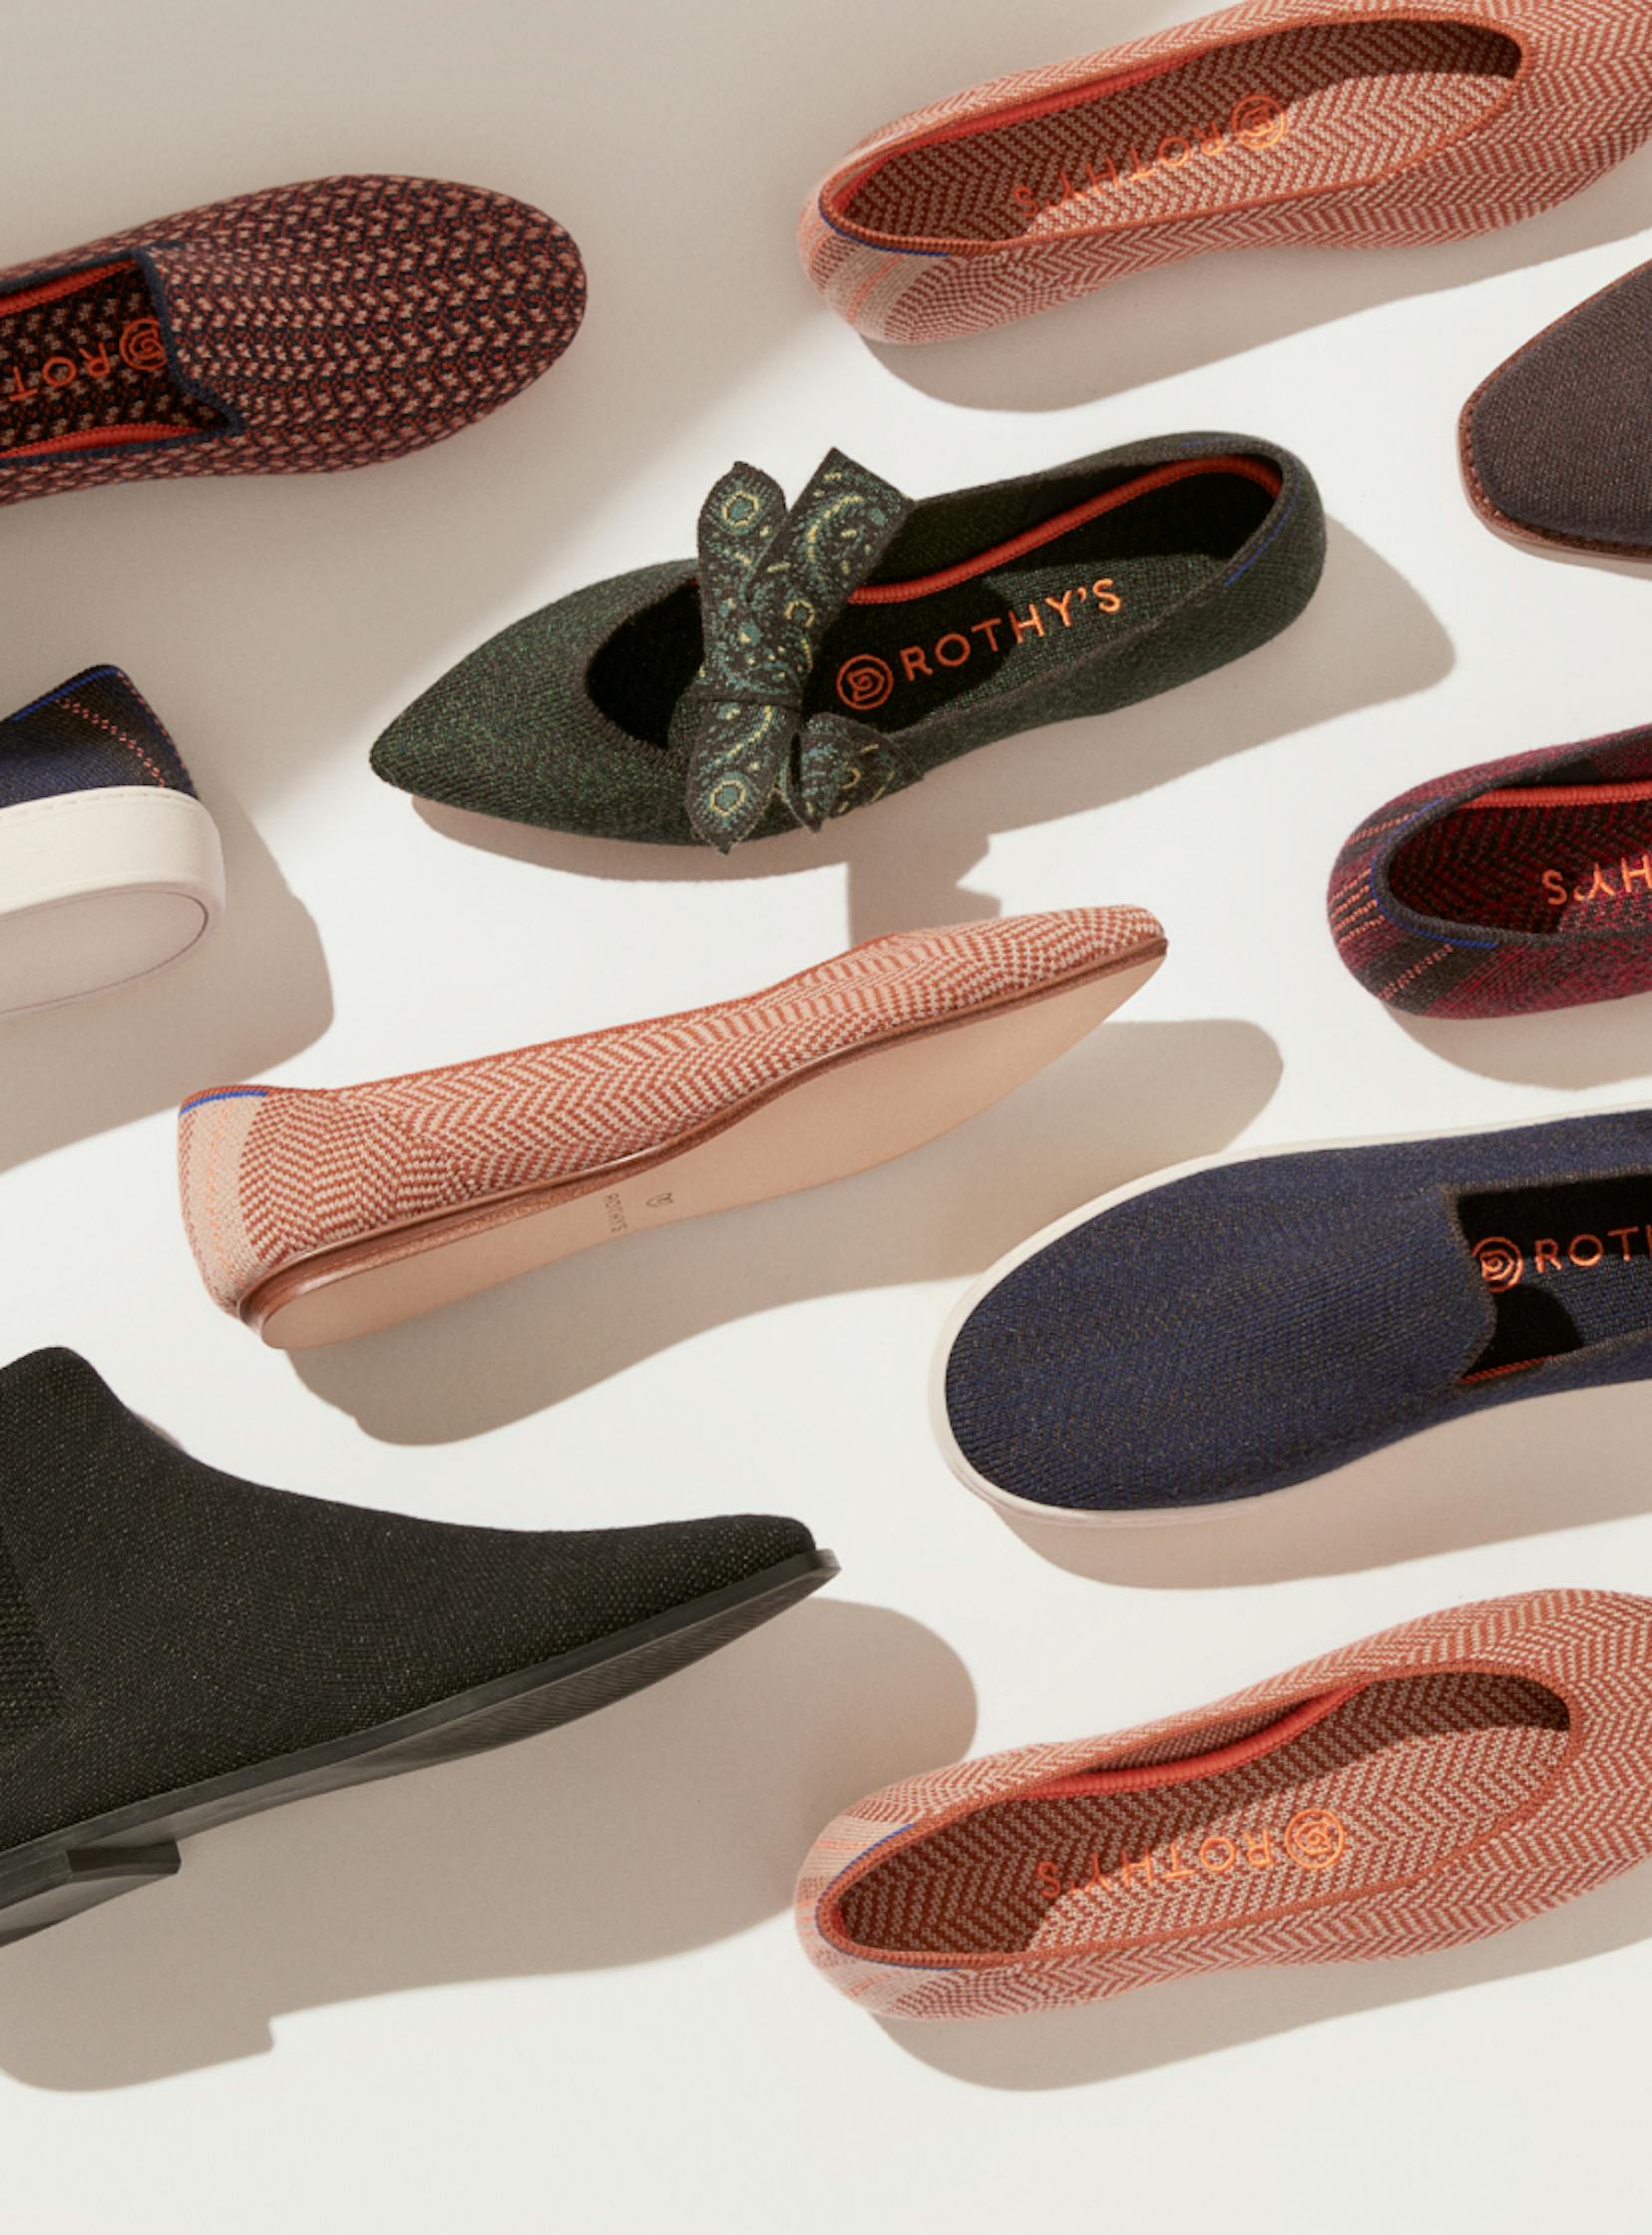 Rothy's: Washable, Woven Flats & Shoes Made from Recycled Plastic